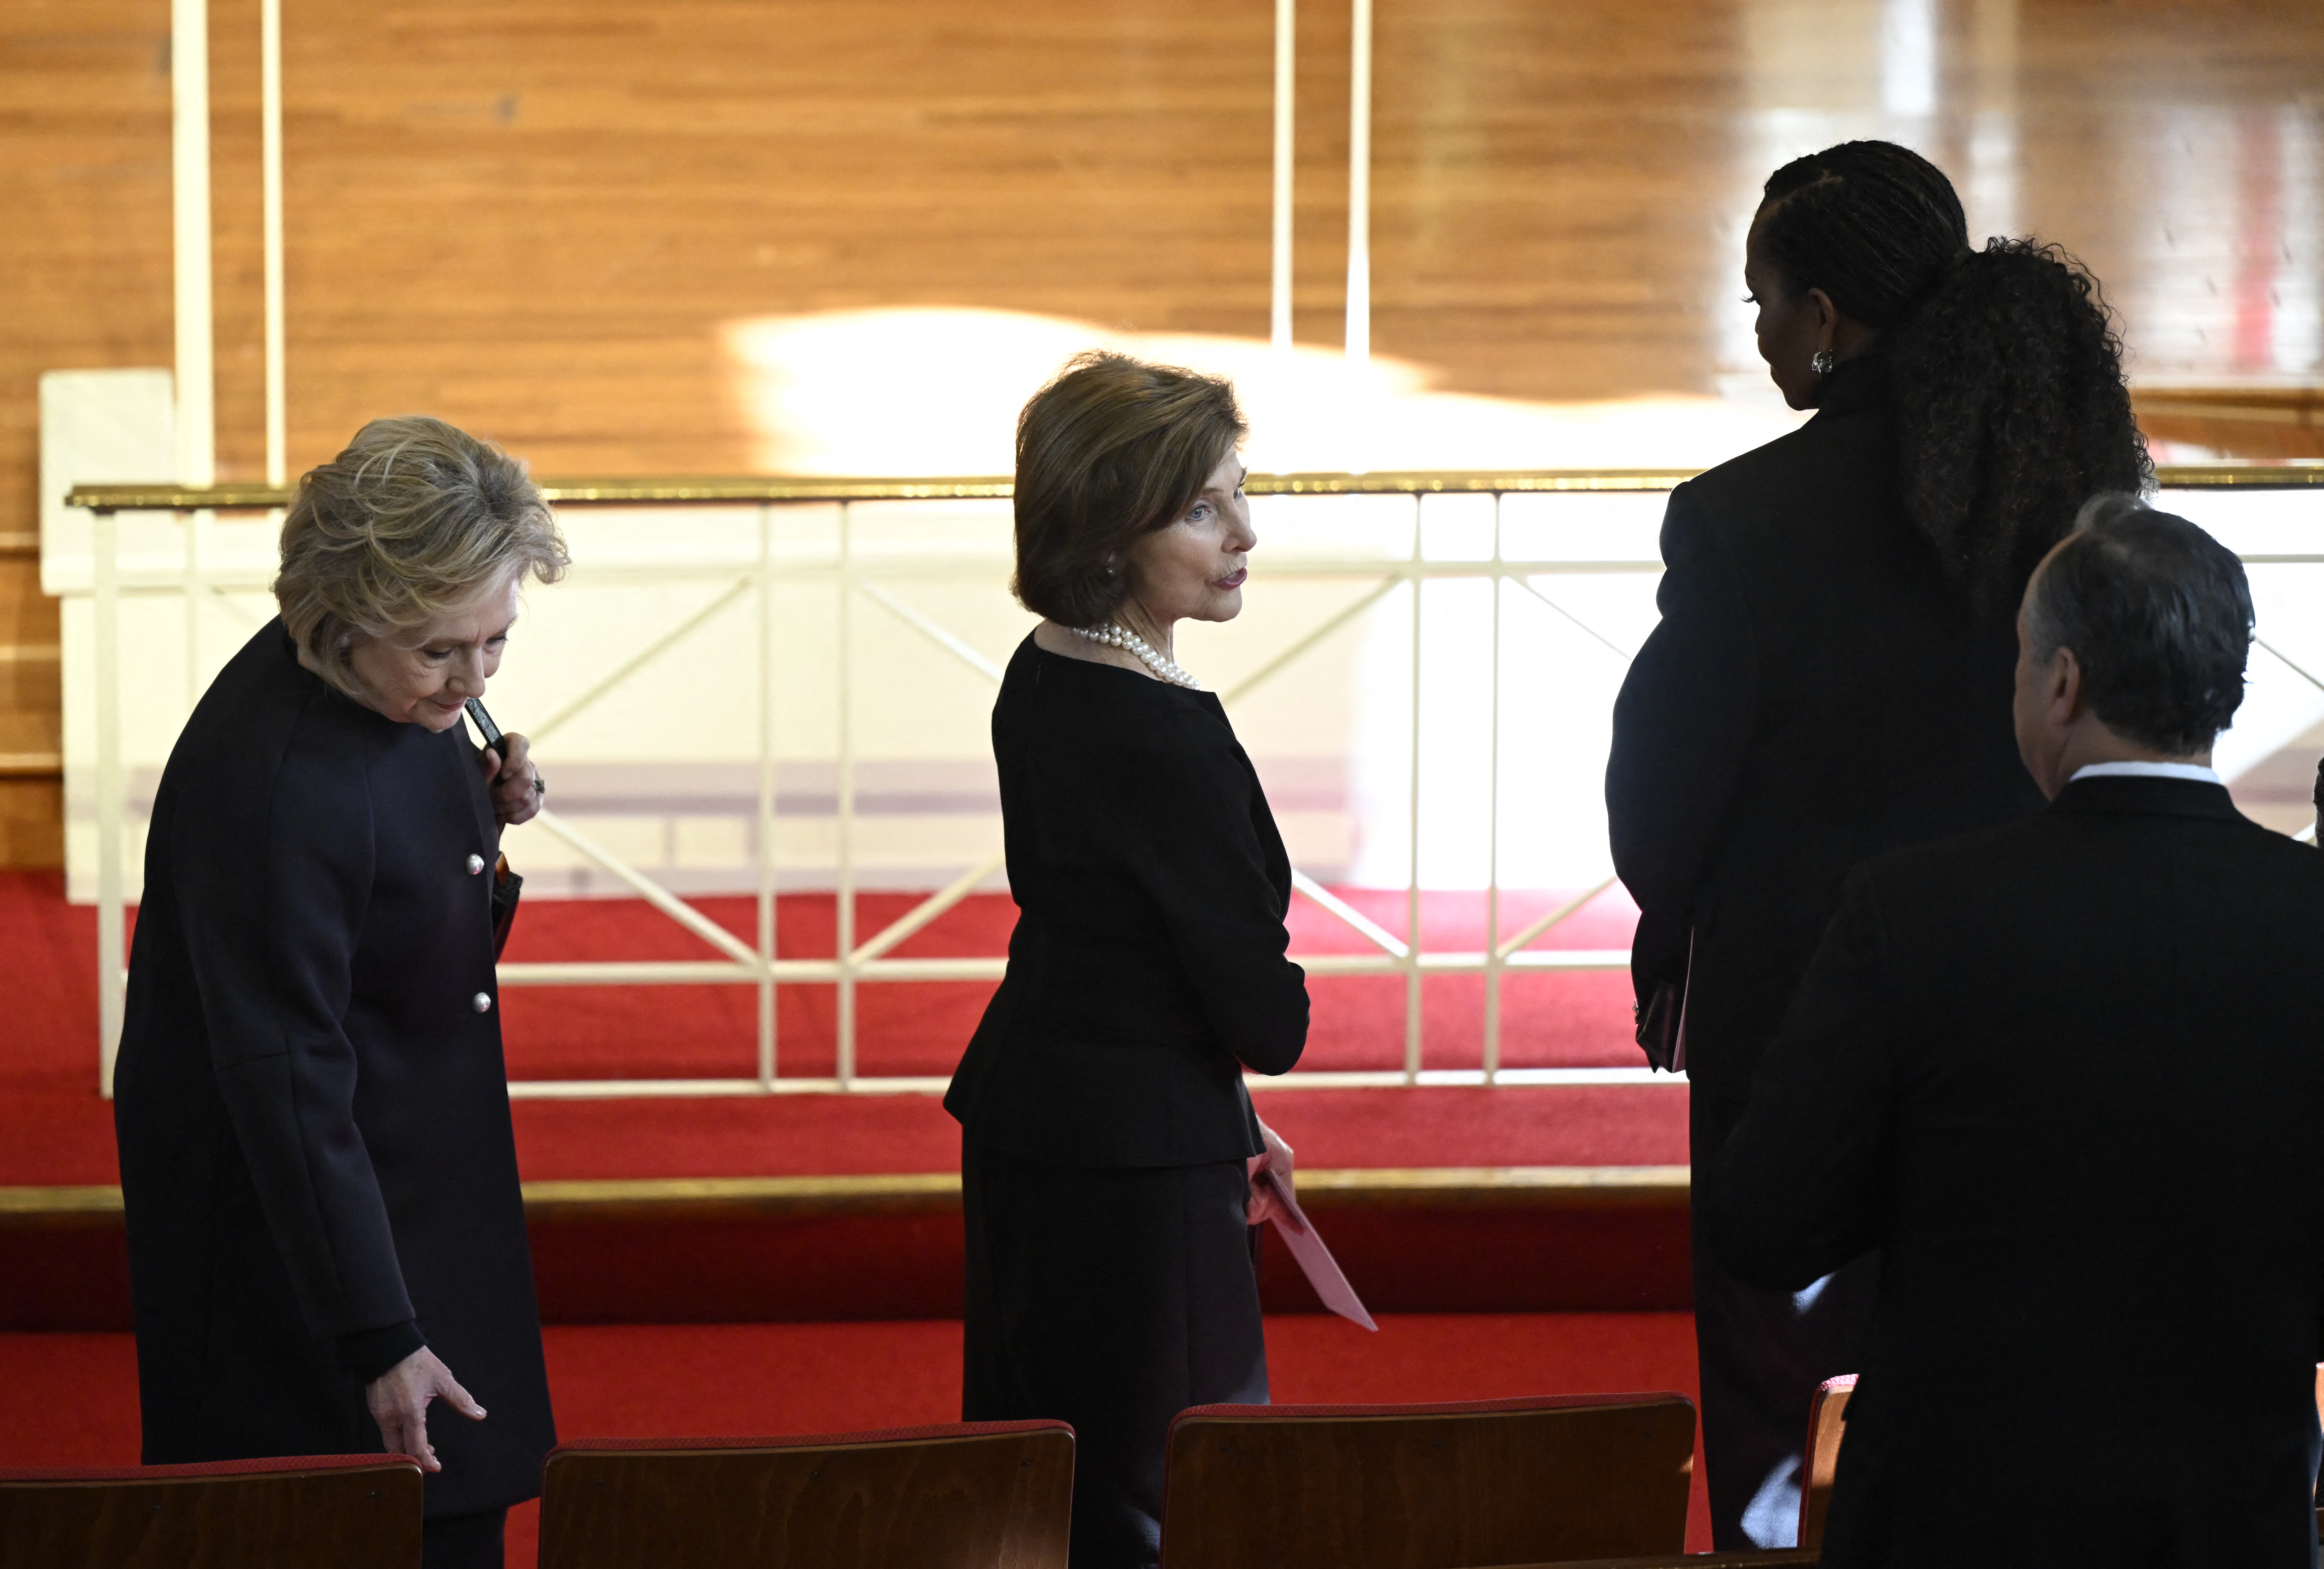 Former U.S. First Ladies Hillary Clinton, Laura Bush, and Michelle Obama at former U.S First Lady Rosalynn Carter's tribute service in Atlanta, Georgia on November 28, 2023 | Source: Getty Images